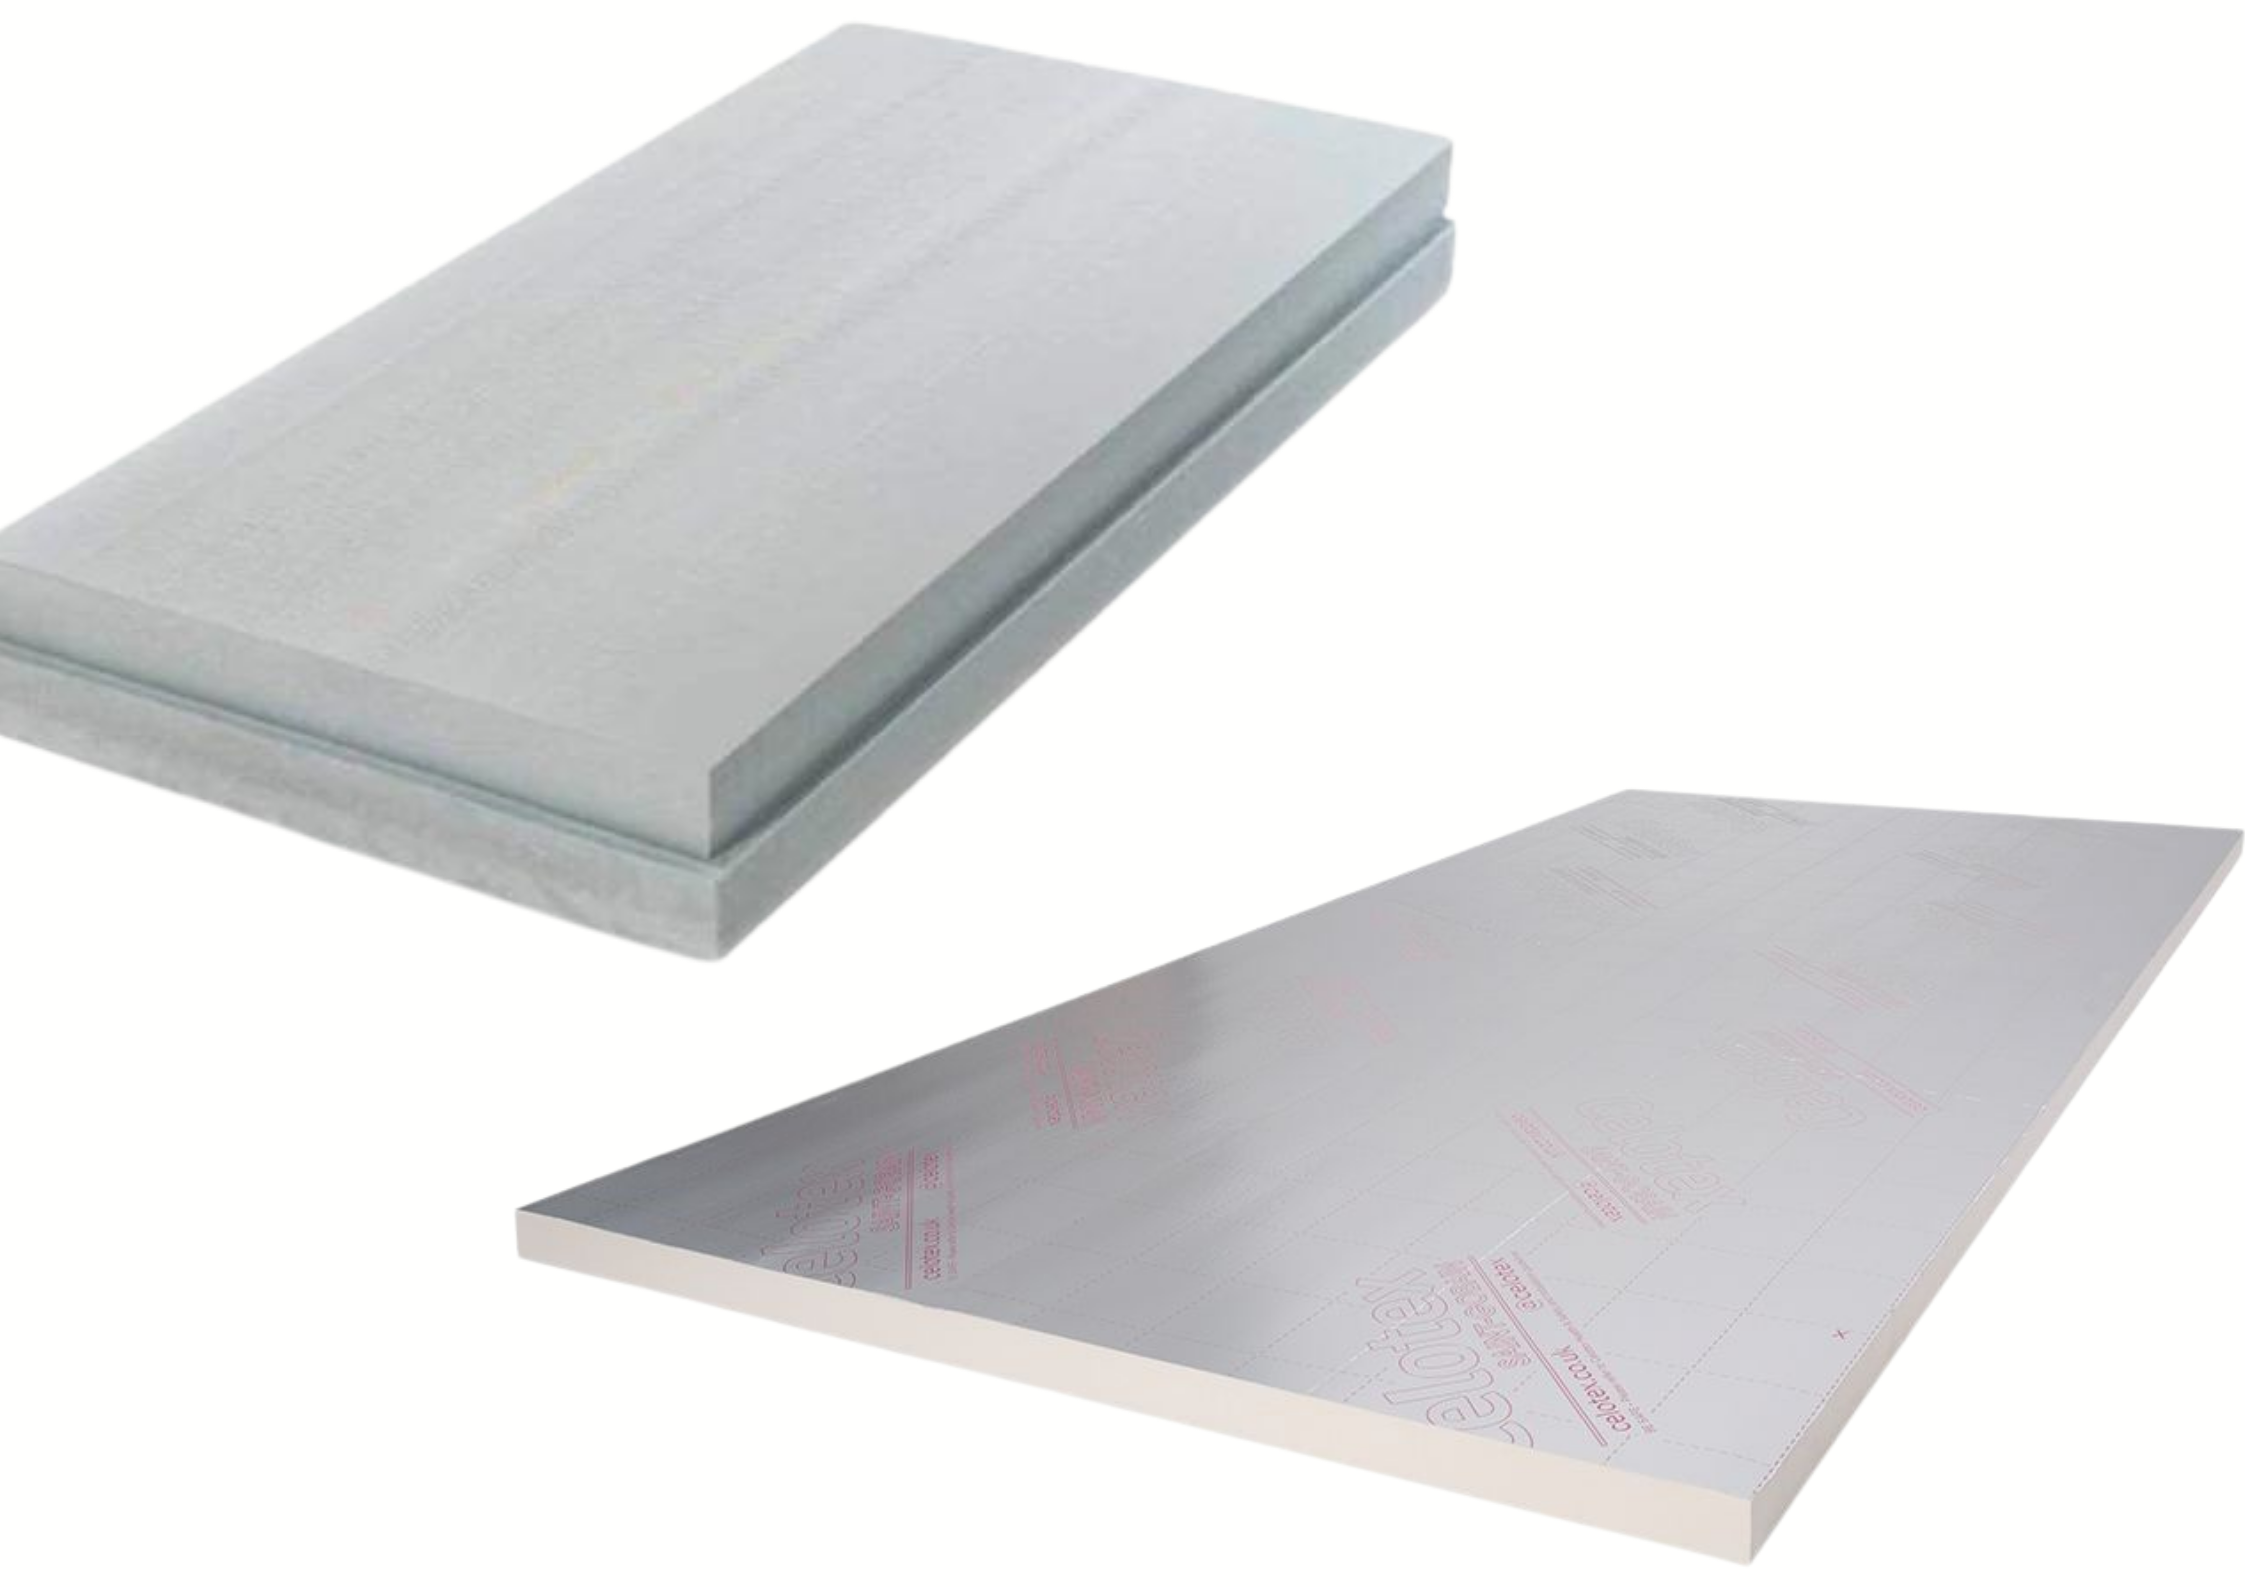 Differences Between Extruded Polystyrene (Xps) And Pir Insulation